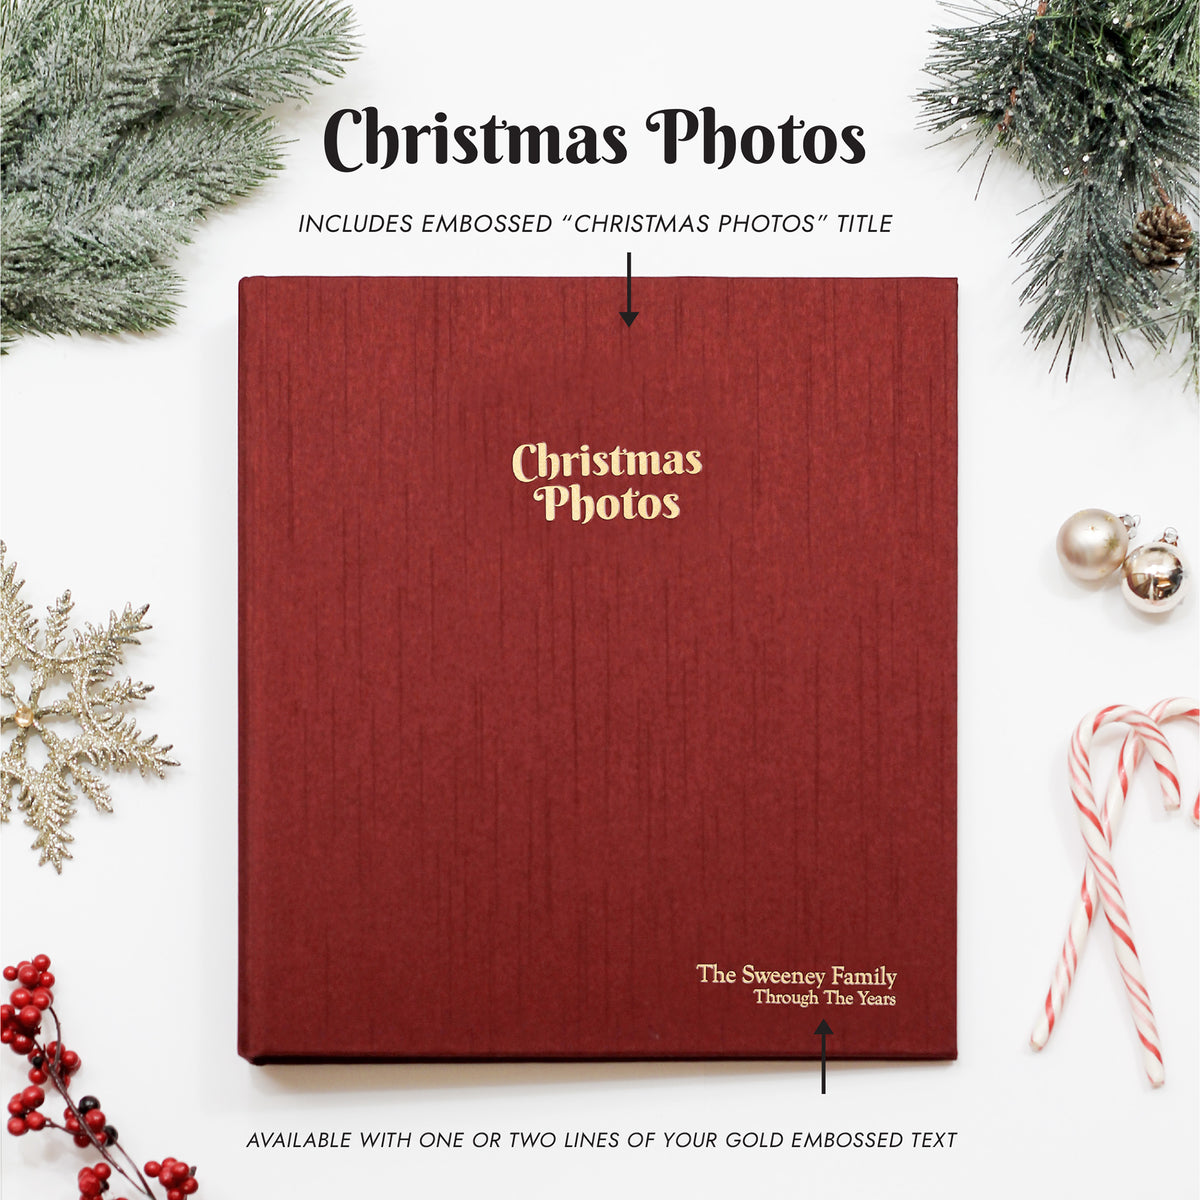 Large Christmas Photo Binder with Jade Silk Cover for 4x6 or 5x7 Photos